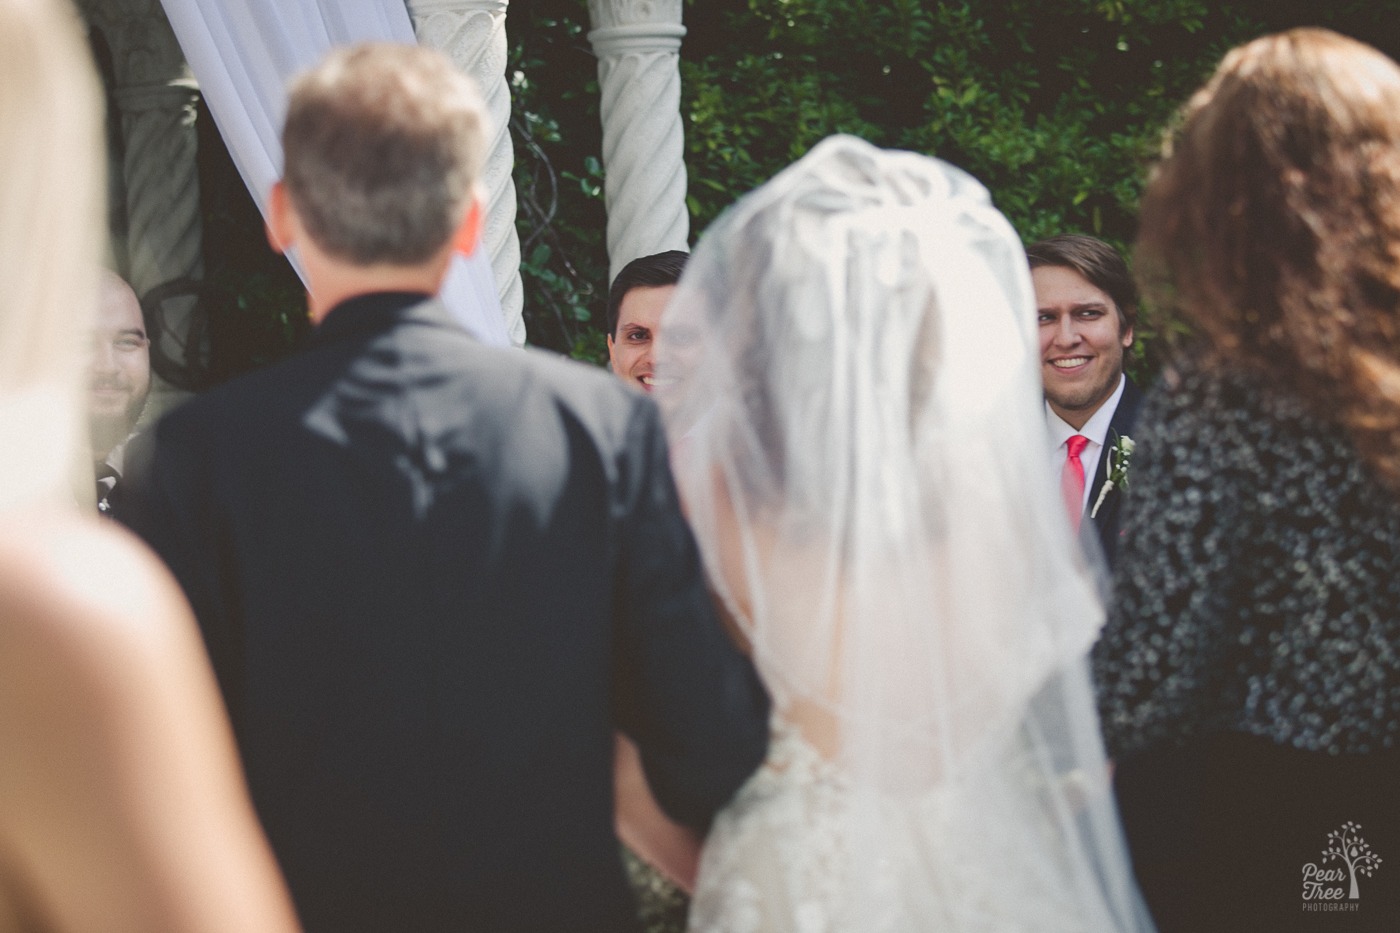 Groom smiling as he watches his wife to be walk down the aisle towards him.